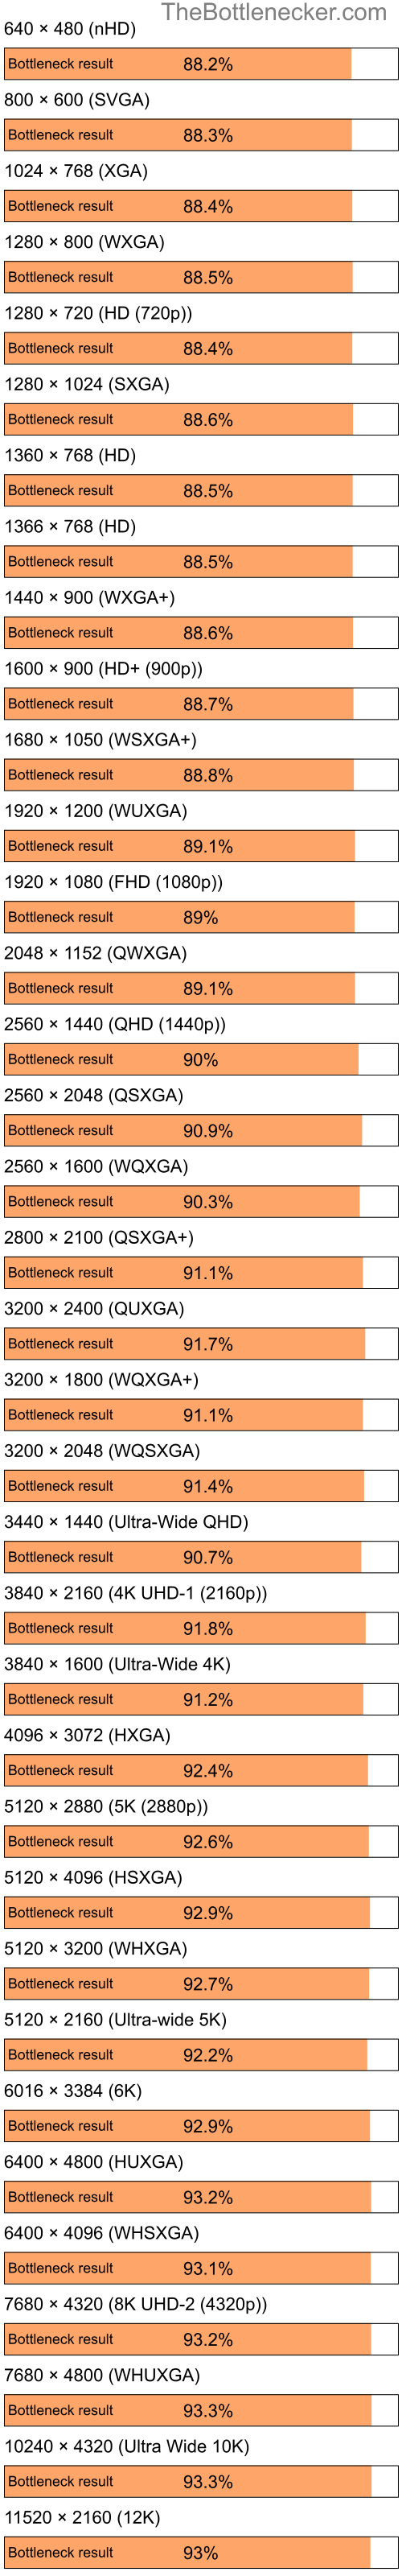 Bottleneck results by resolution for Intel Pentium 4 and NVIDIA GeForce4 MX Integrated GPU in General Tasks